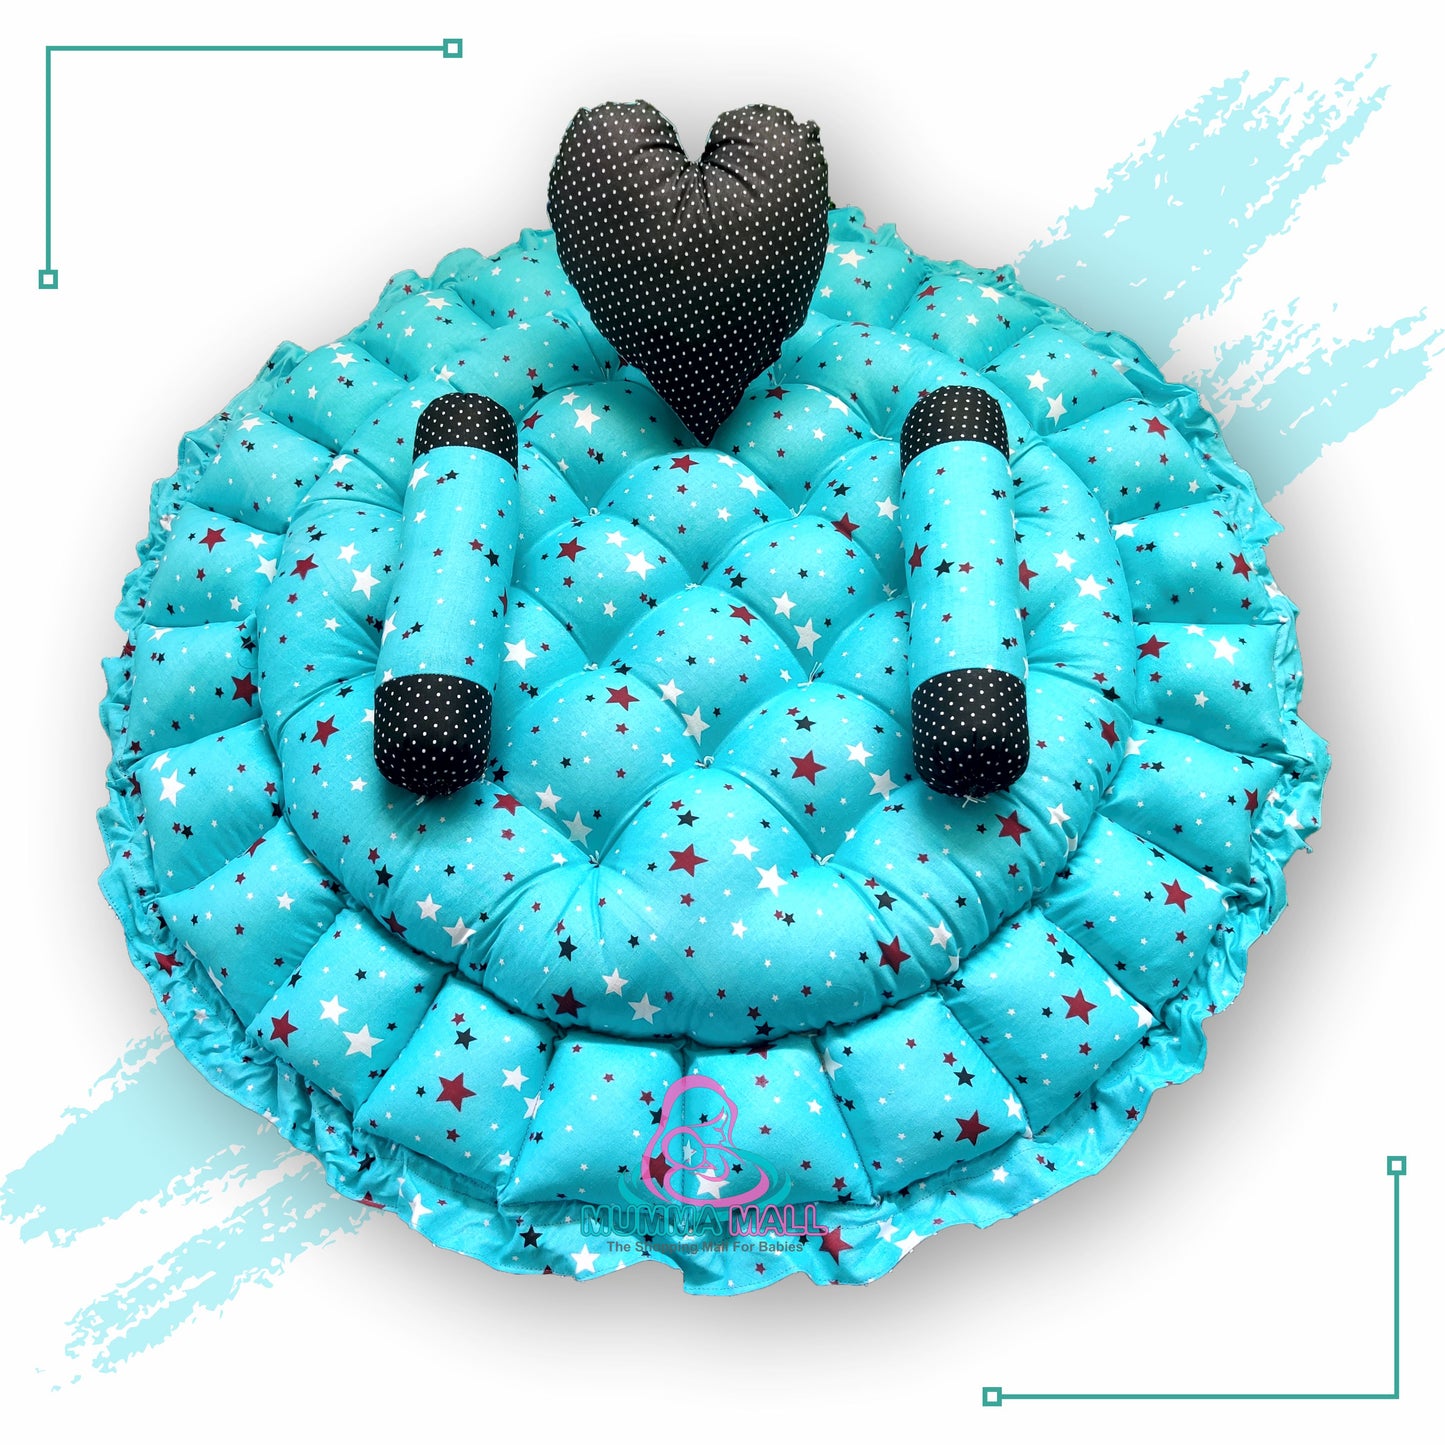 Round baby tub bed with a heart pillow and pair of Bolster (Turquoise and Black)